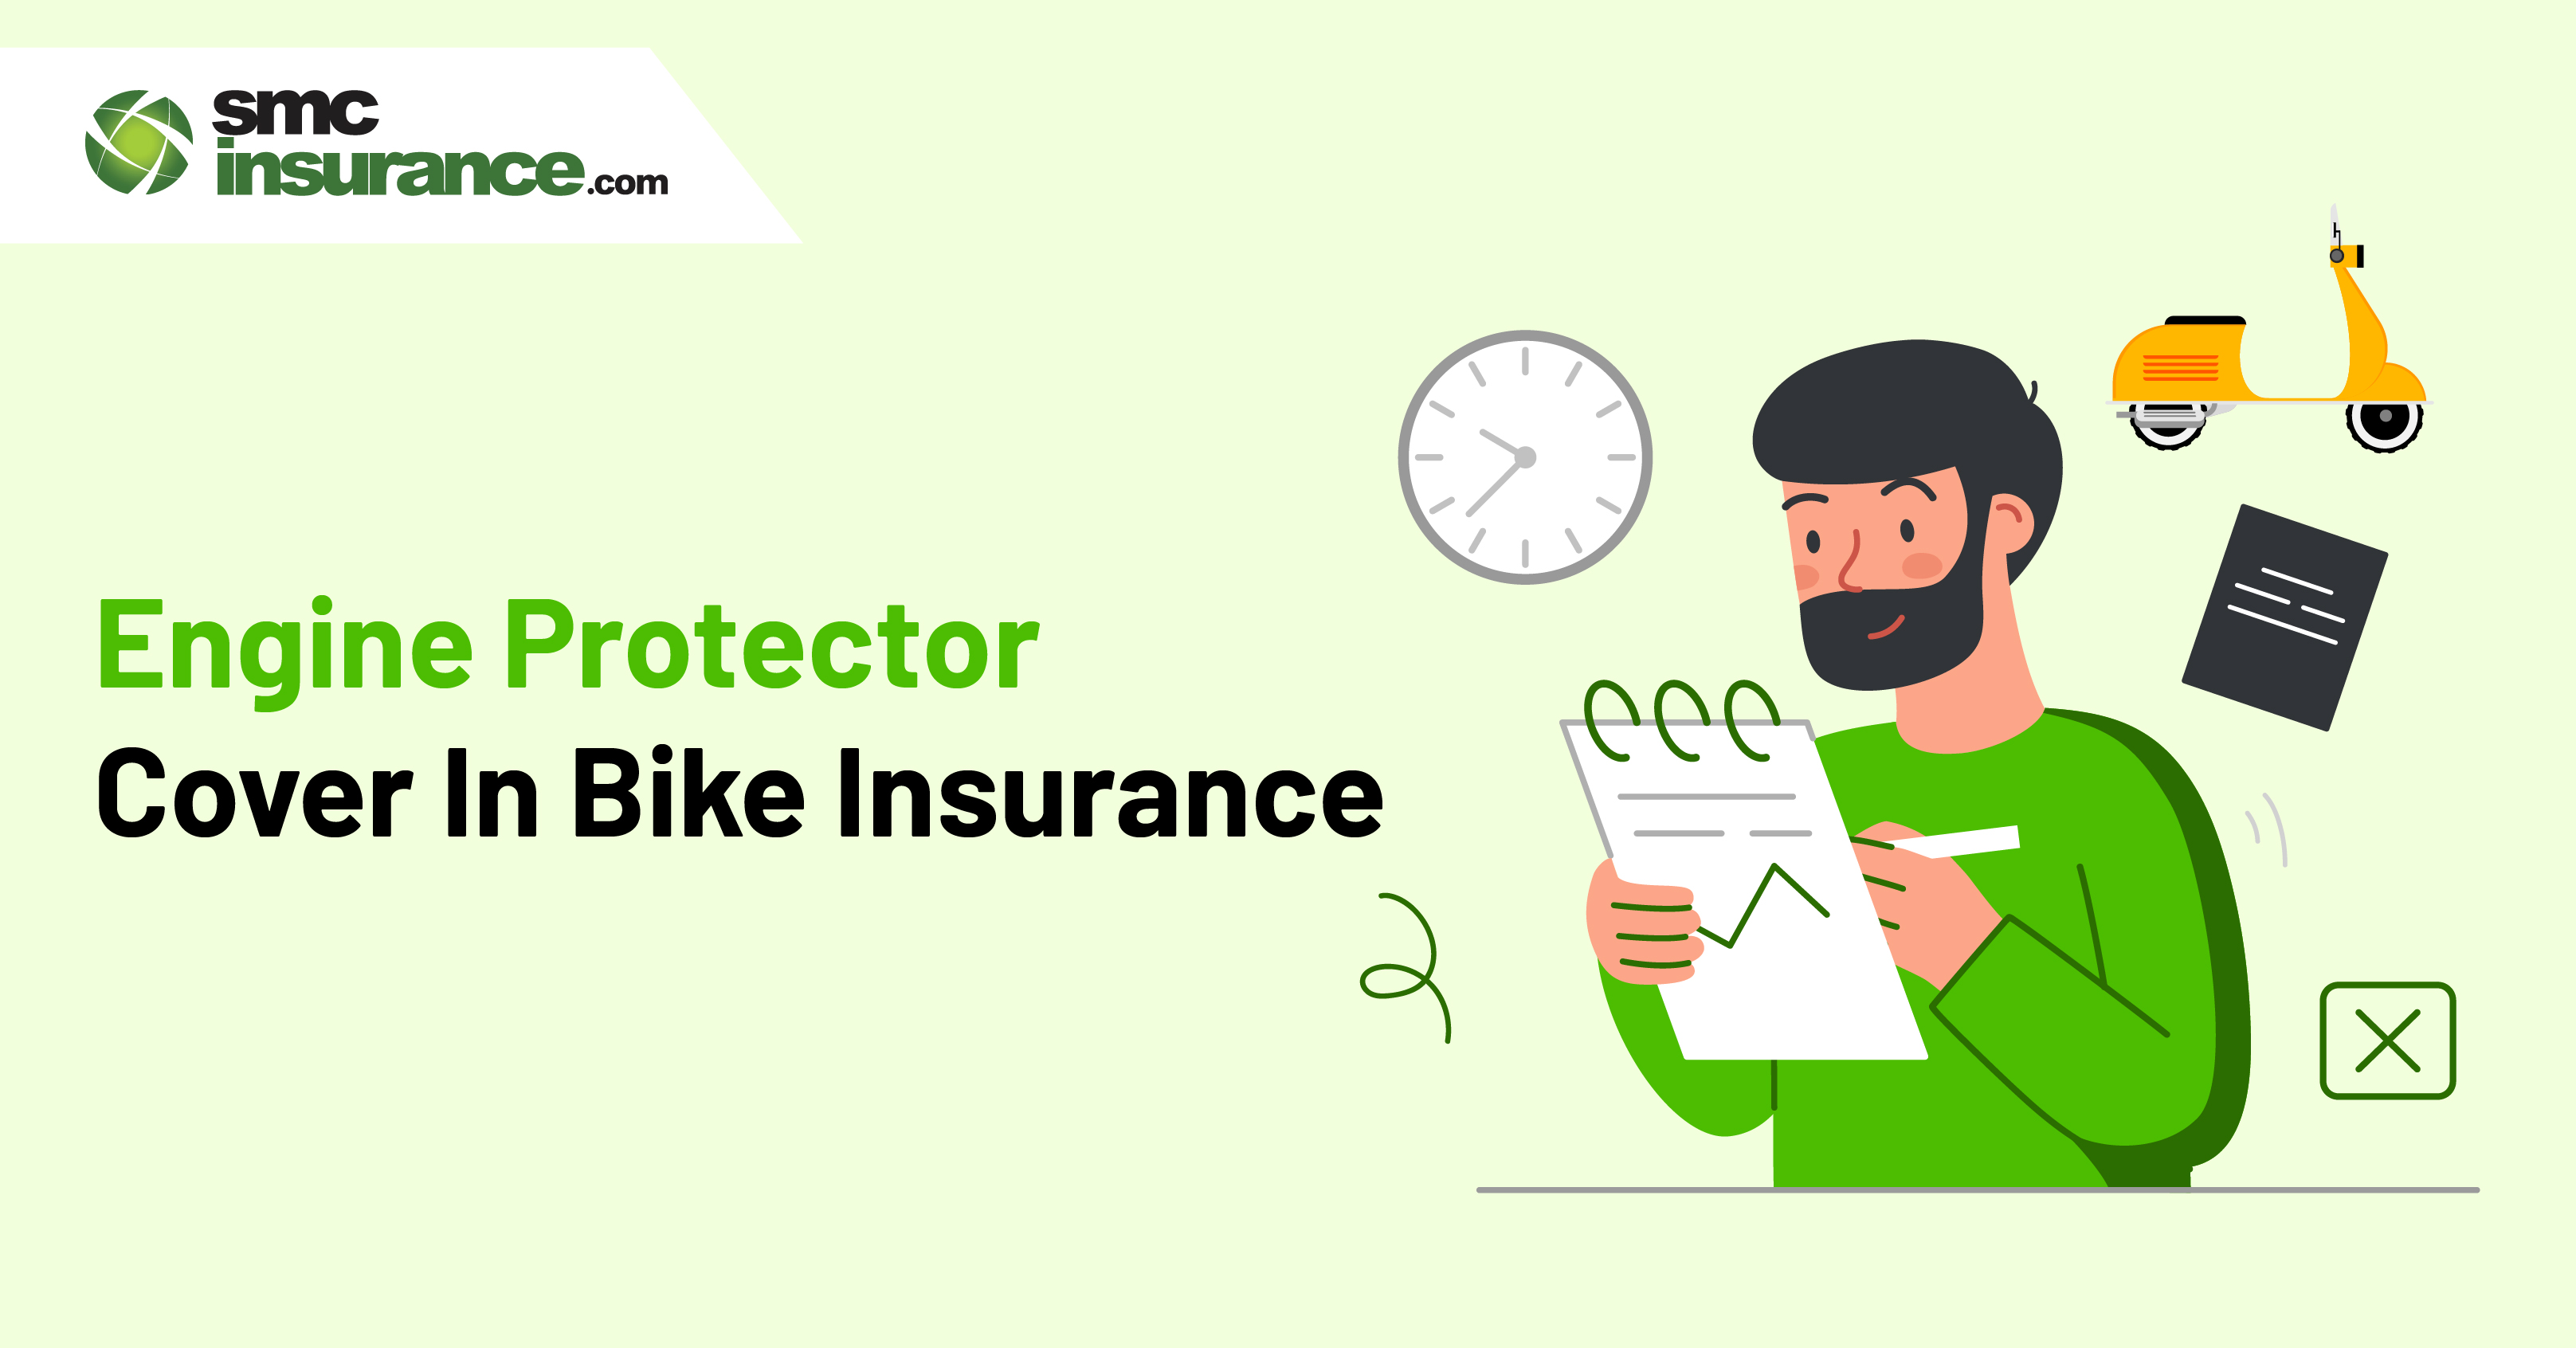 Engine Protector Cover in Bike Insurance